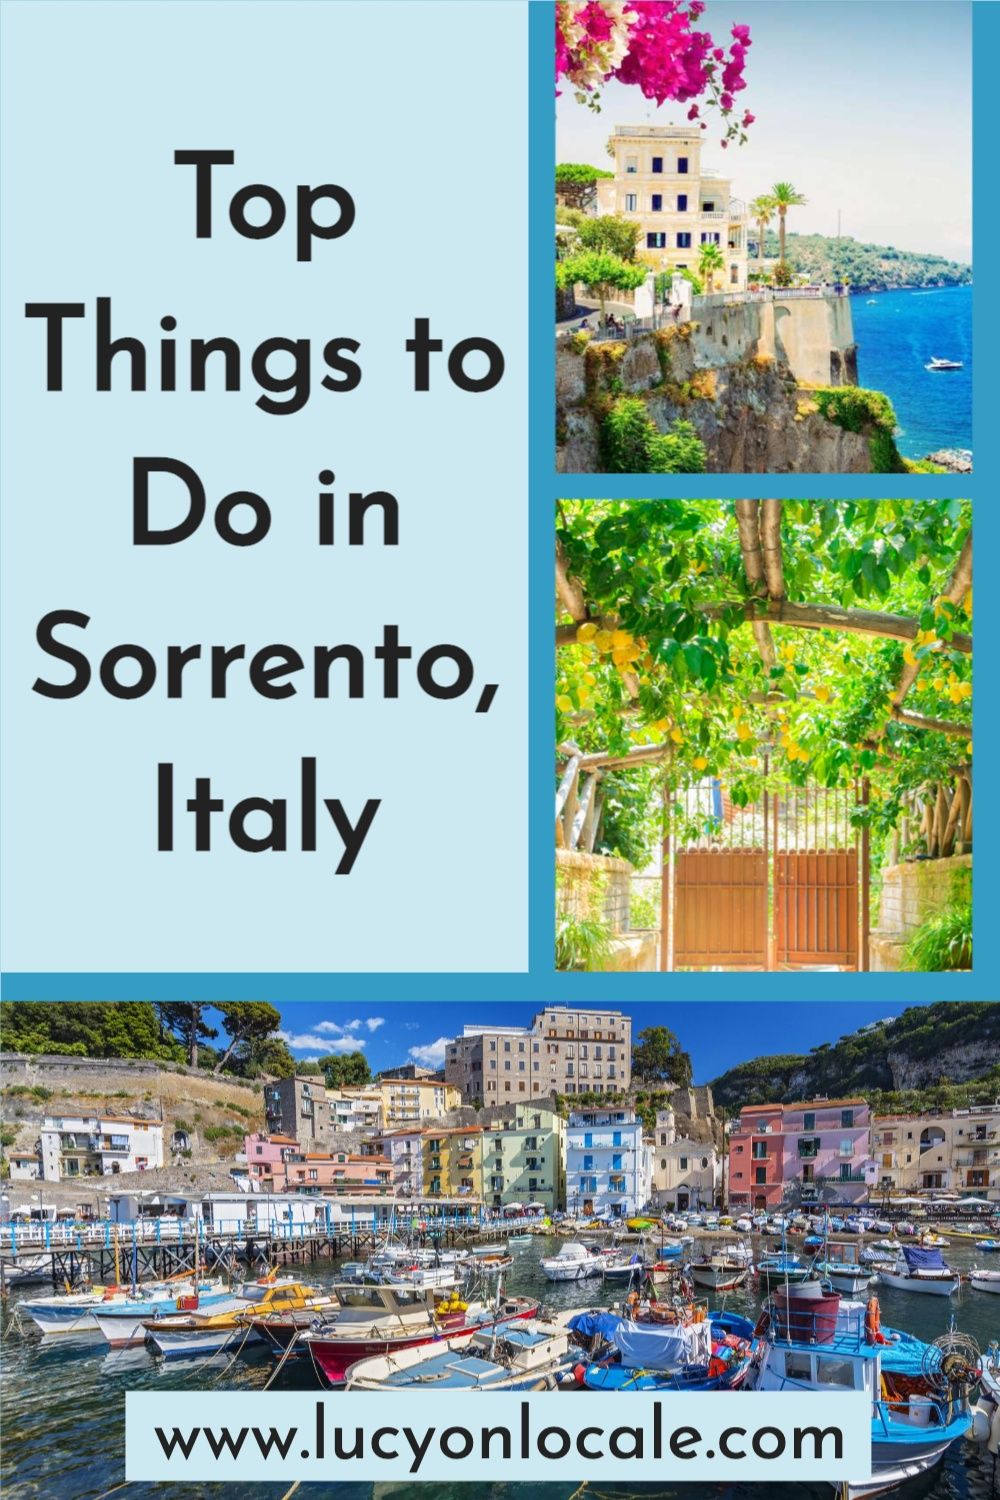 Top Things to Do in Sorrento, Italy